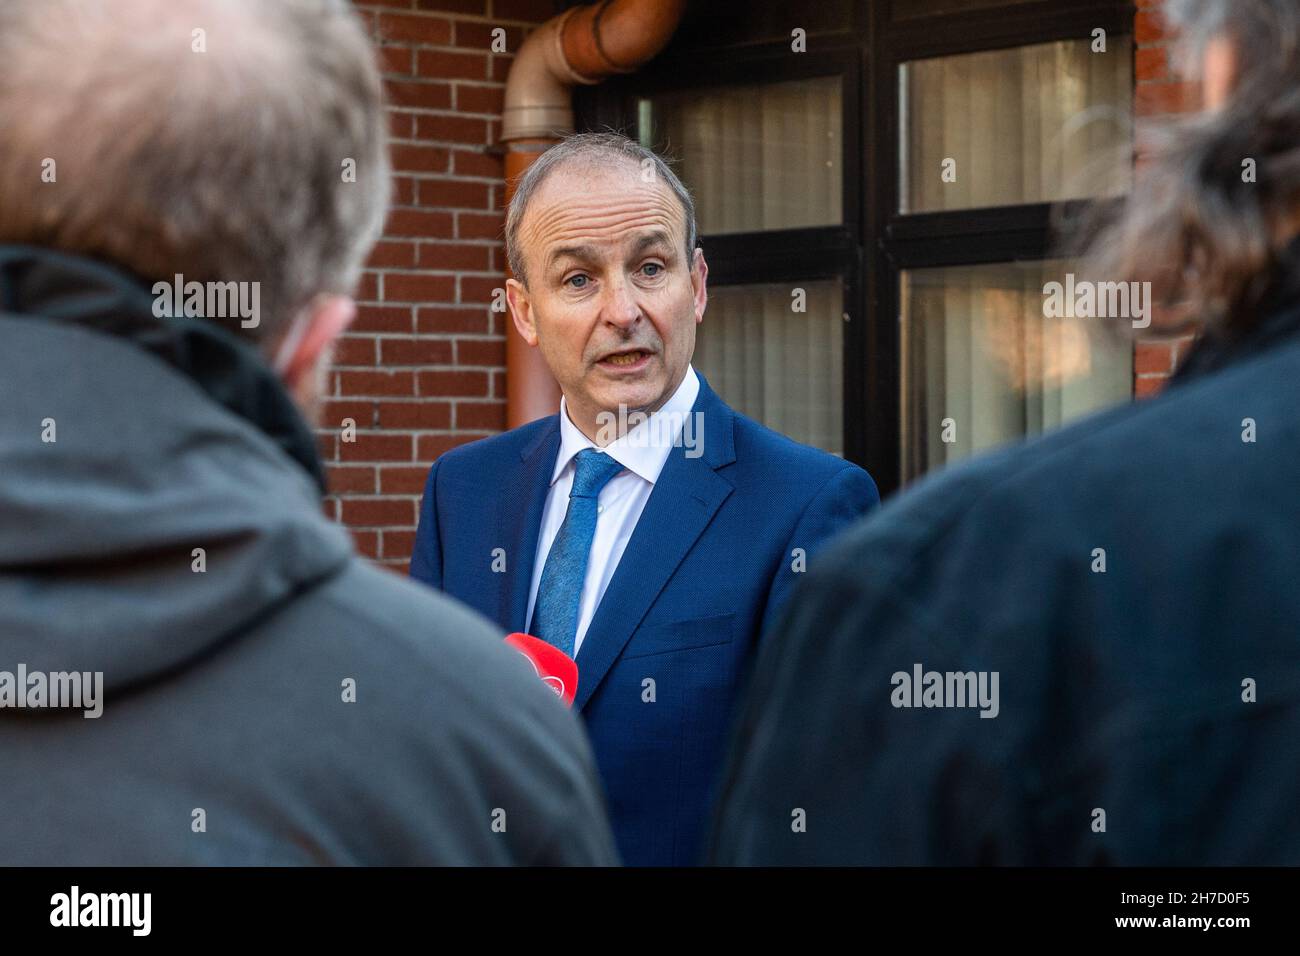 Knocknaheeny, Cork, Ireland. 22nd Nov, 2021. An Taoiseach, Micheál Martin today launched College Awareness Week 2021 and planted a tree at the Terence MacSwiney School in Knocknaheeny, Cork. Credit: AG News/Alamy Live News Stock Photo